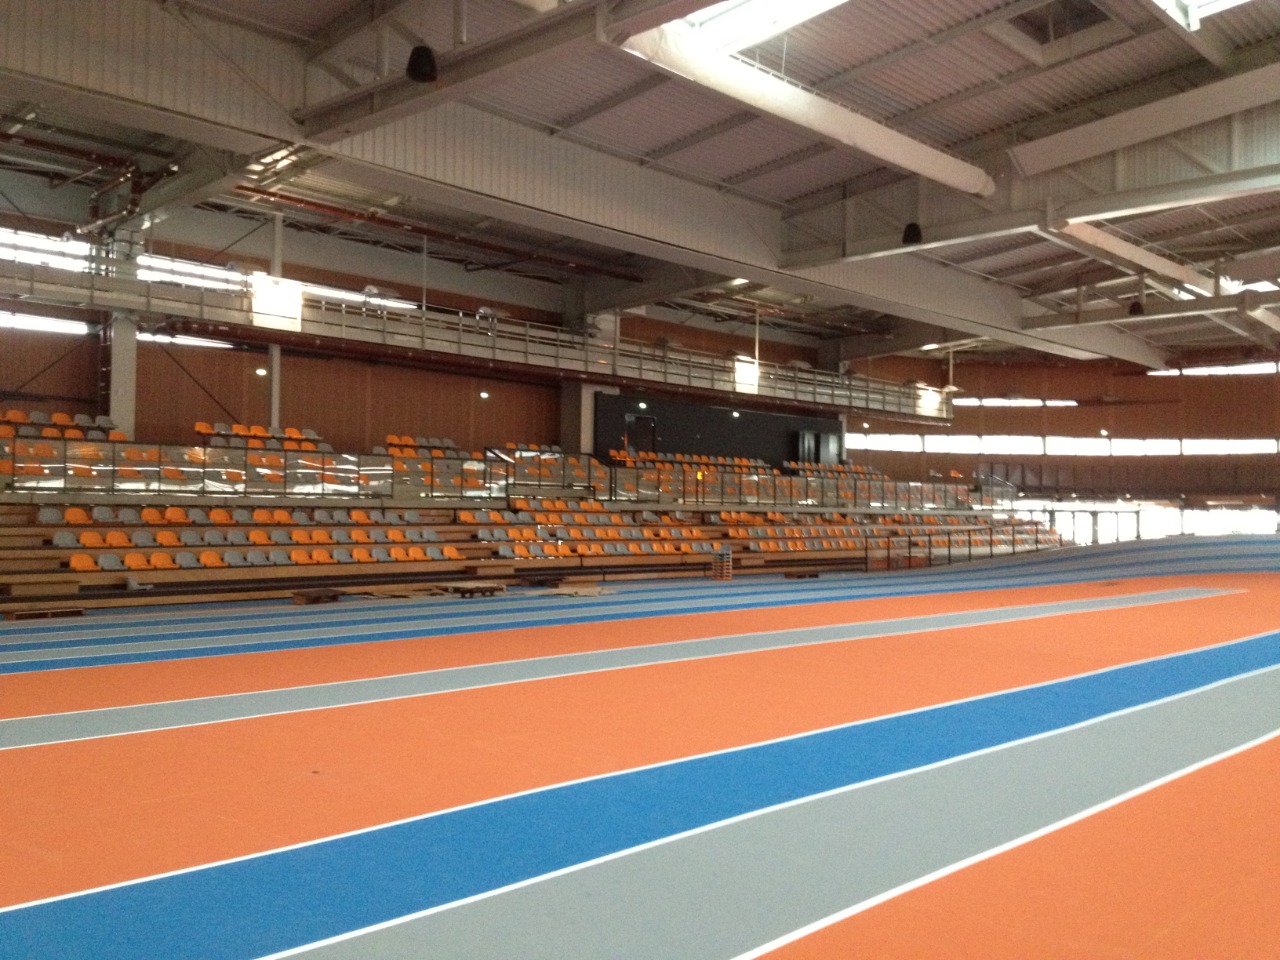 Gallery foto n.2 Telescopic stands - Athletic Hall 